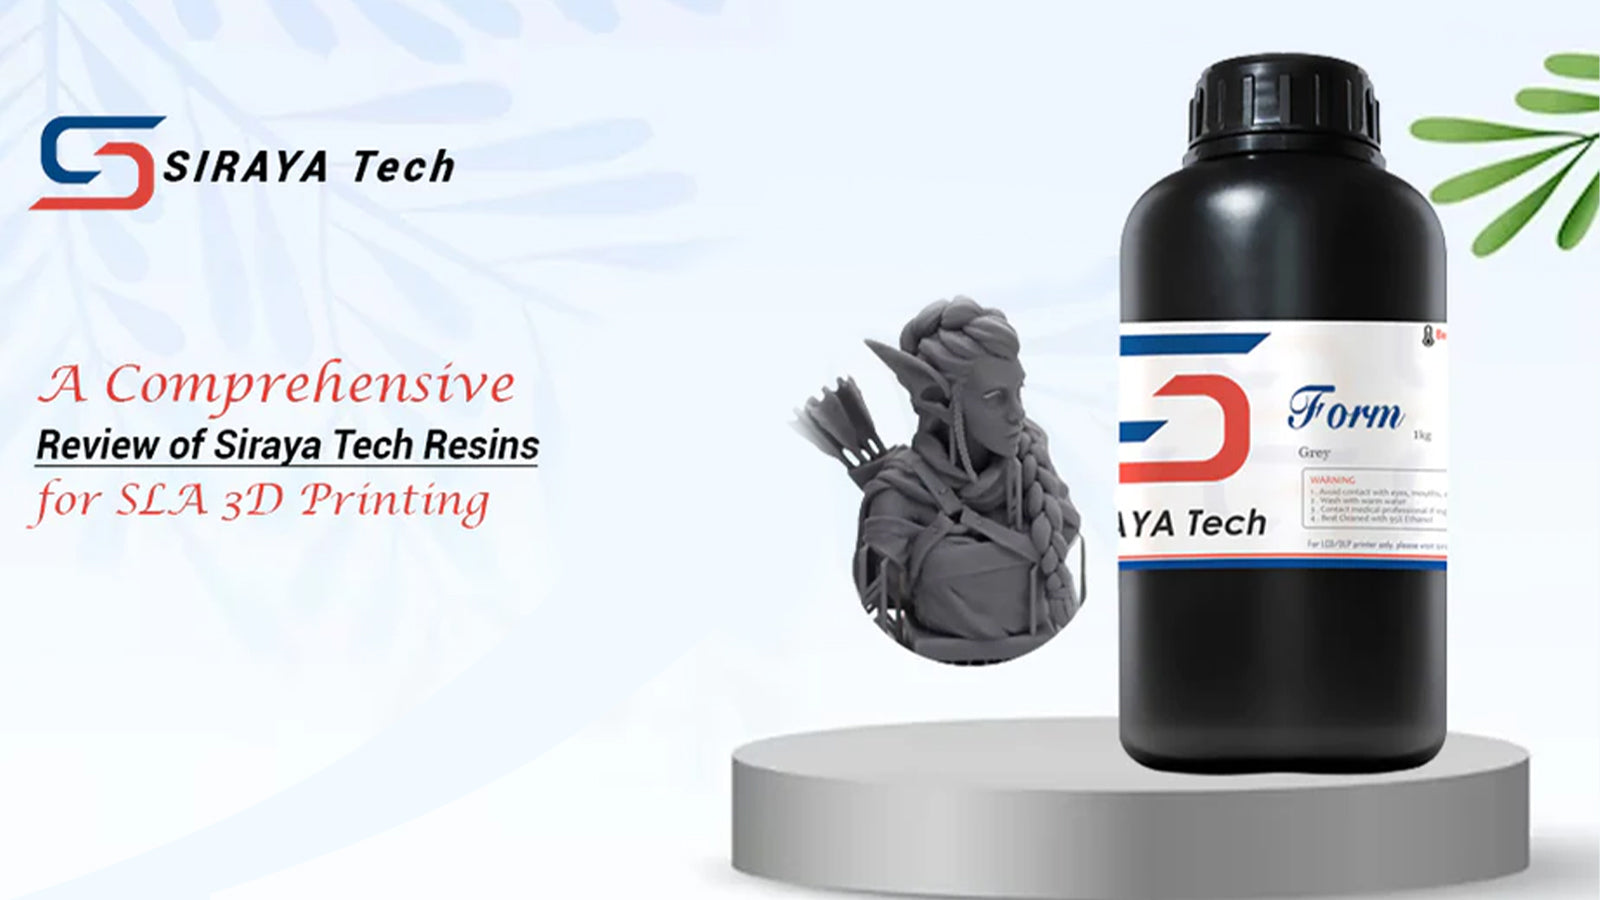 A Comprehensive Review of Siraya Tech Resins for SLA 3D Printing